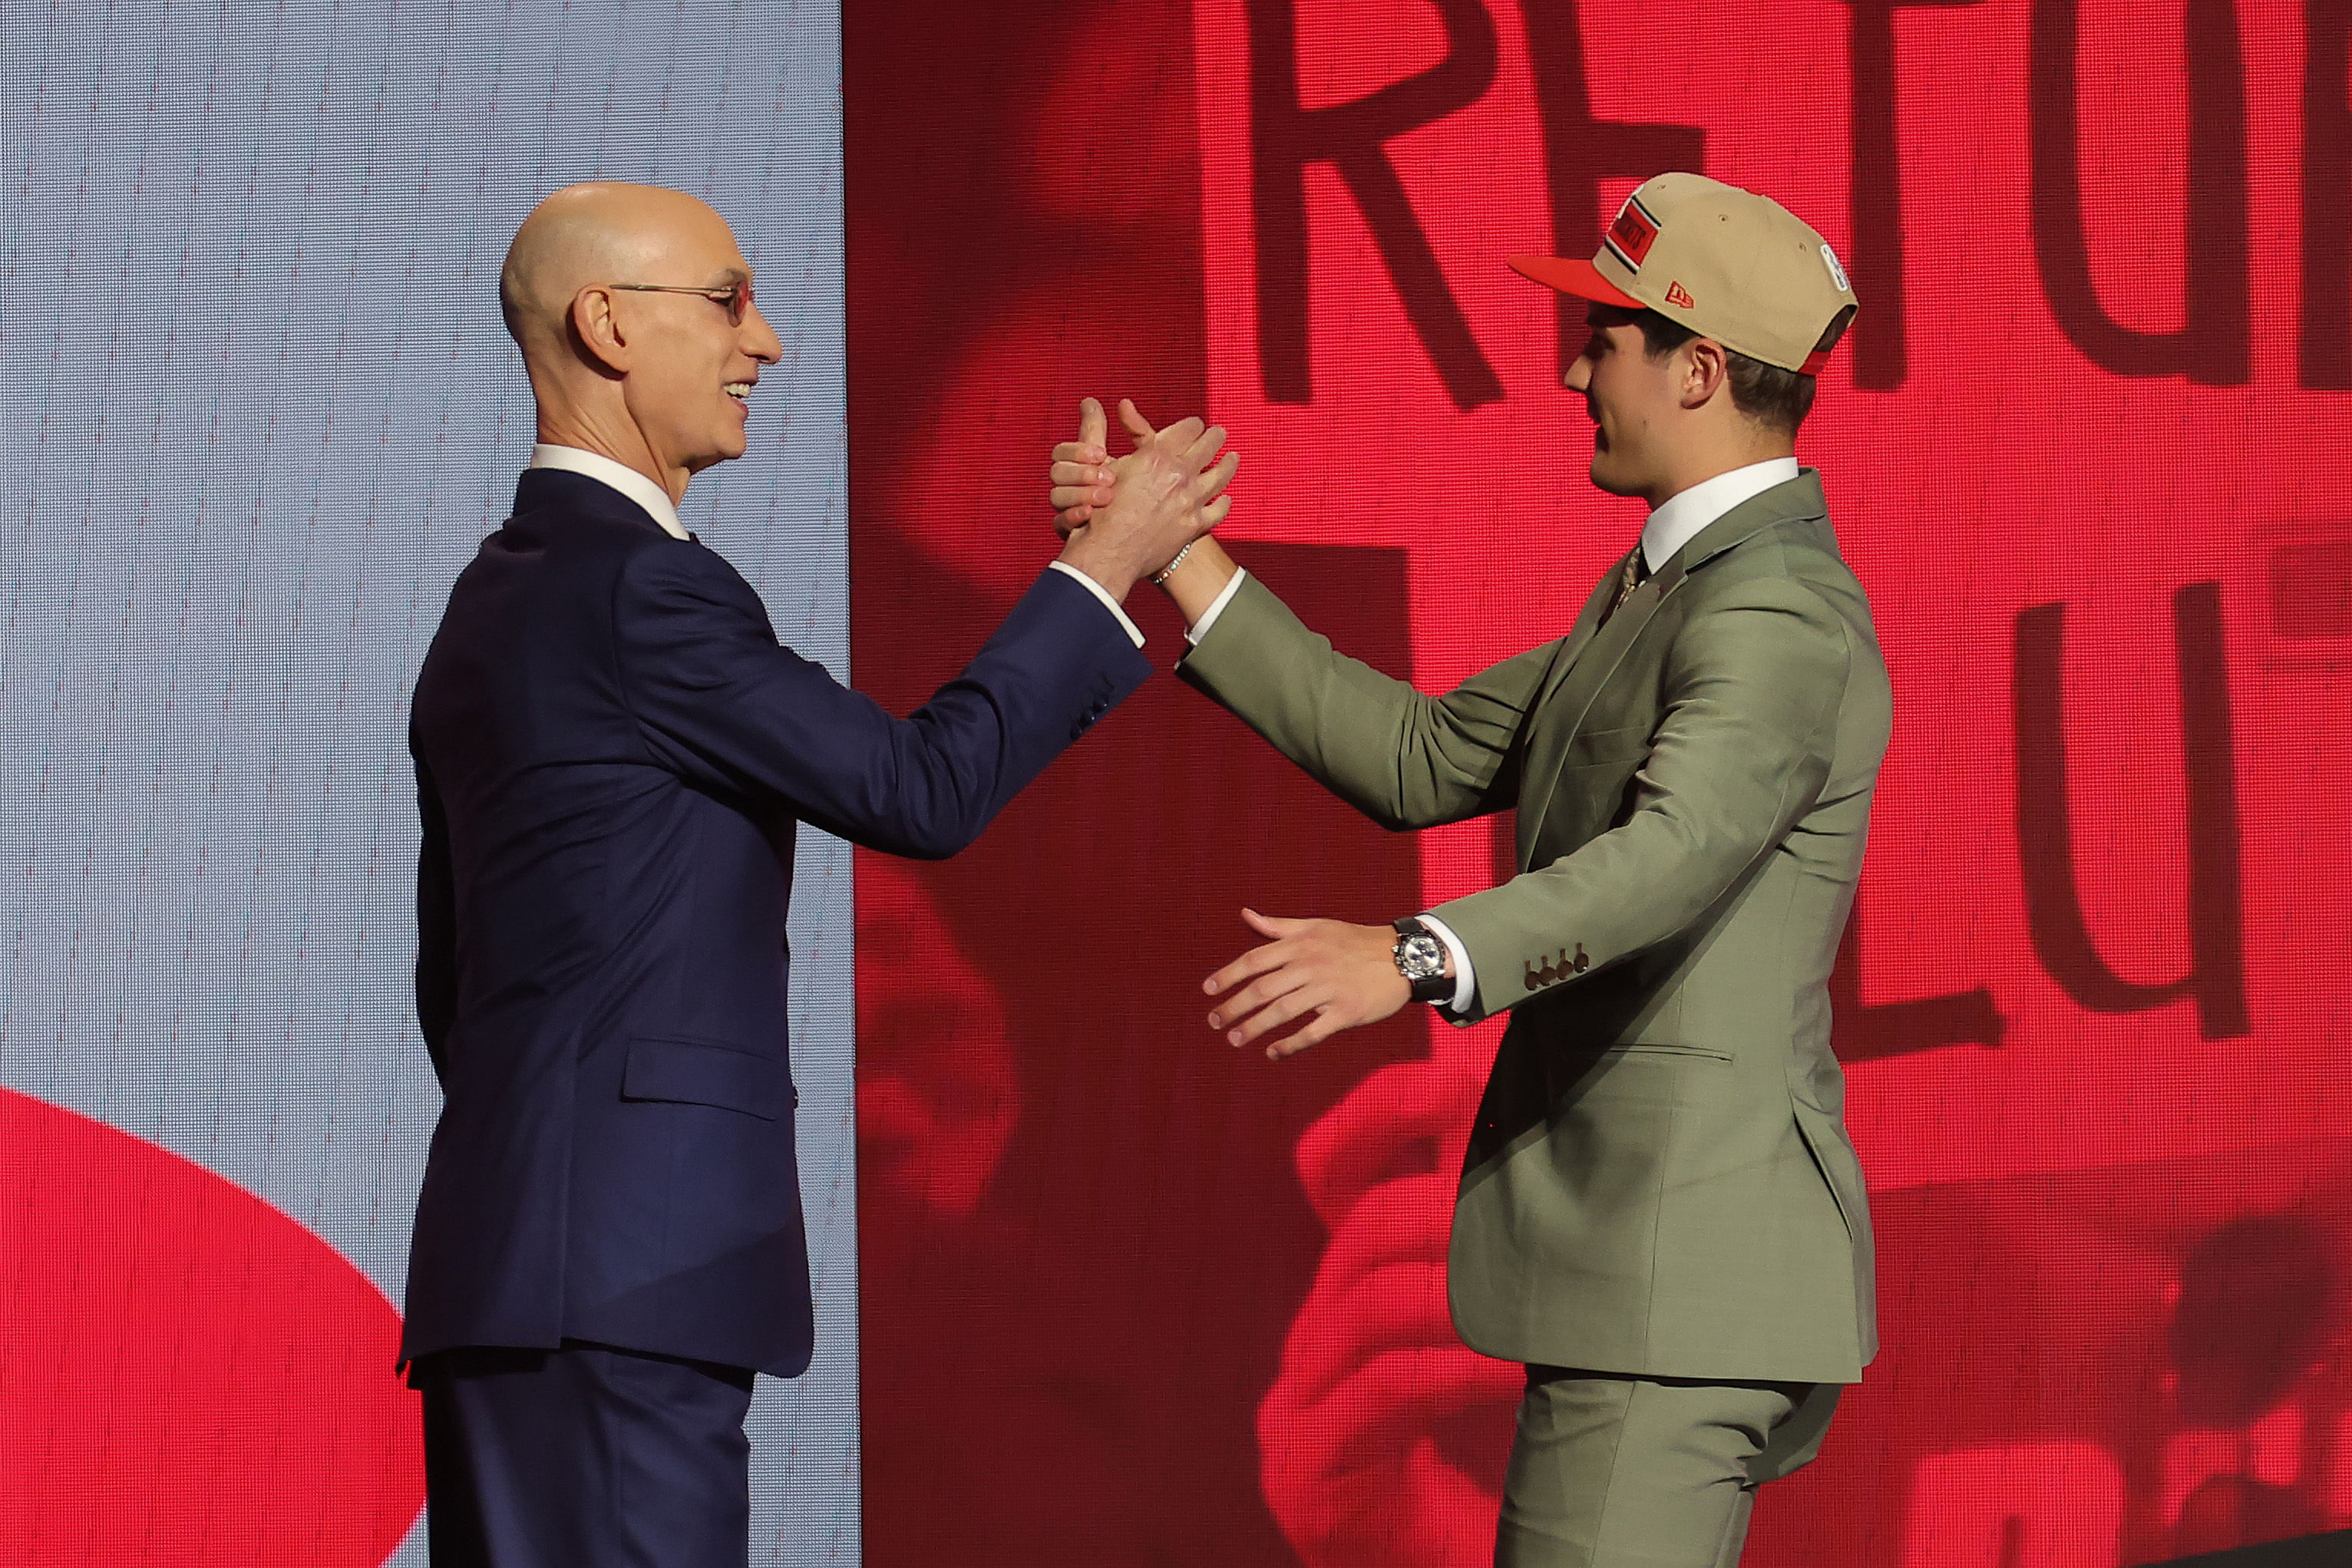 Reed Sheppard shakes hands with NBA commissioner Adam Silver after being selected in the first round by the Houston Rockets in the 2024 NBA Draft. (Image: IMAGN)